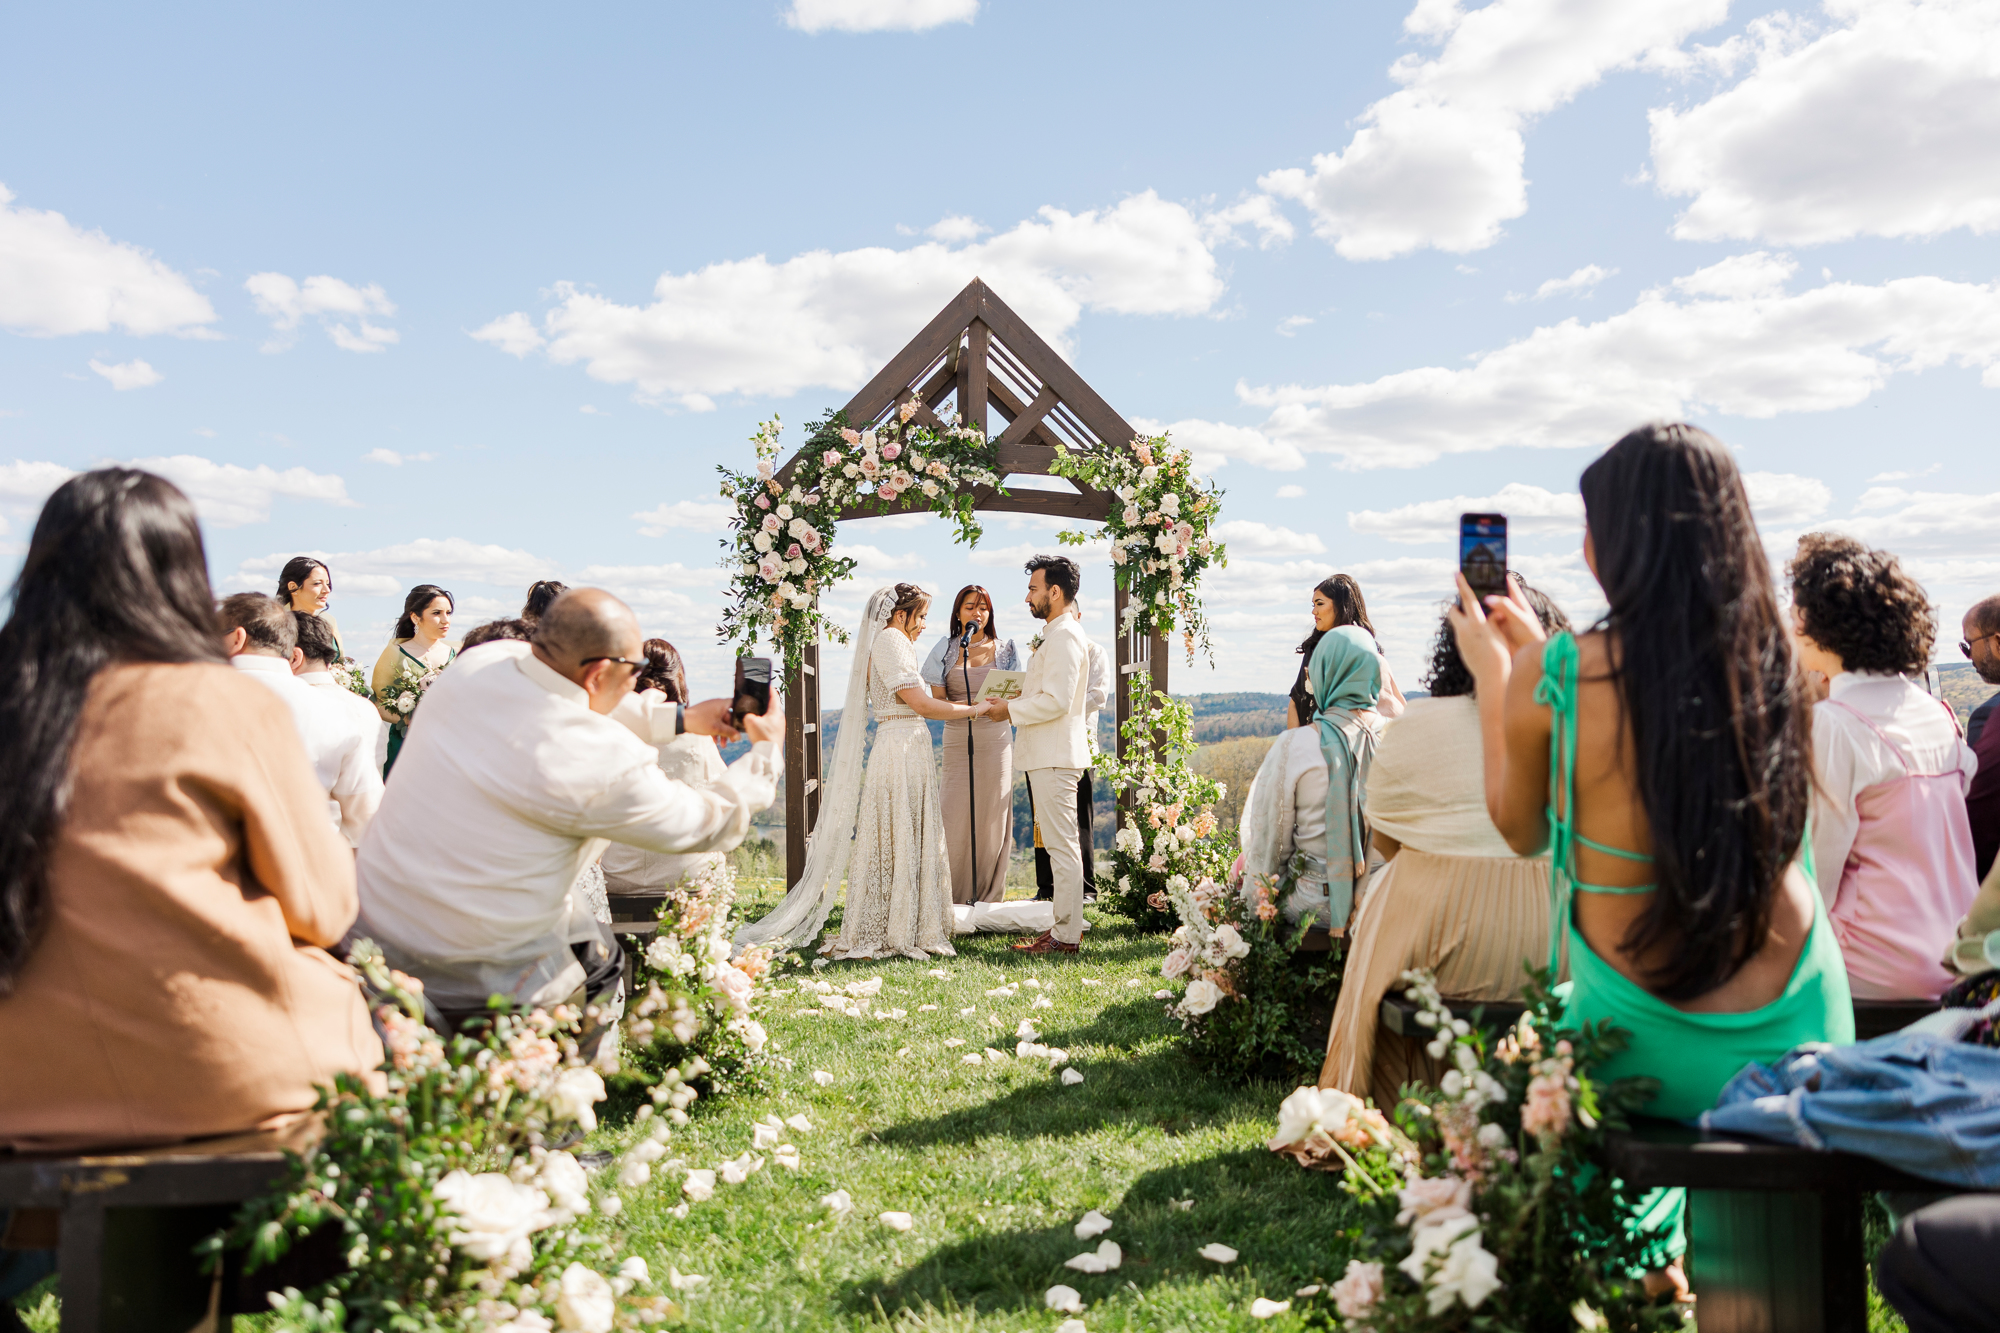 Lively Seminary Hill Wedding in the Summertime